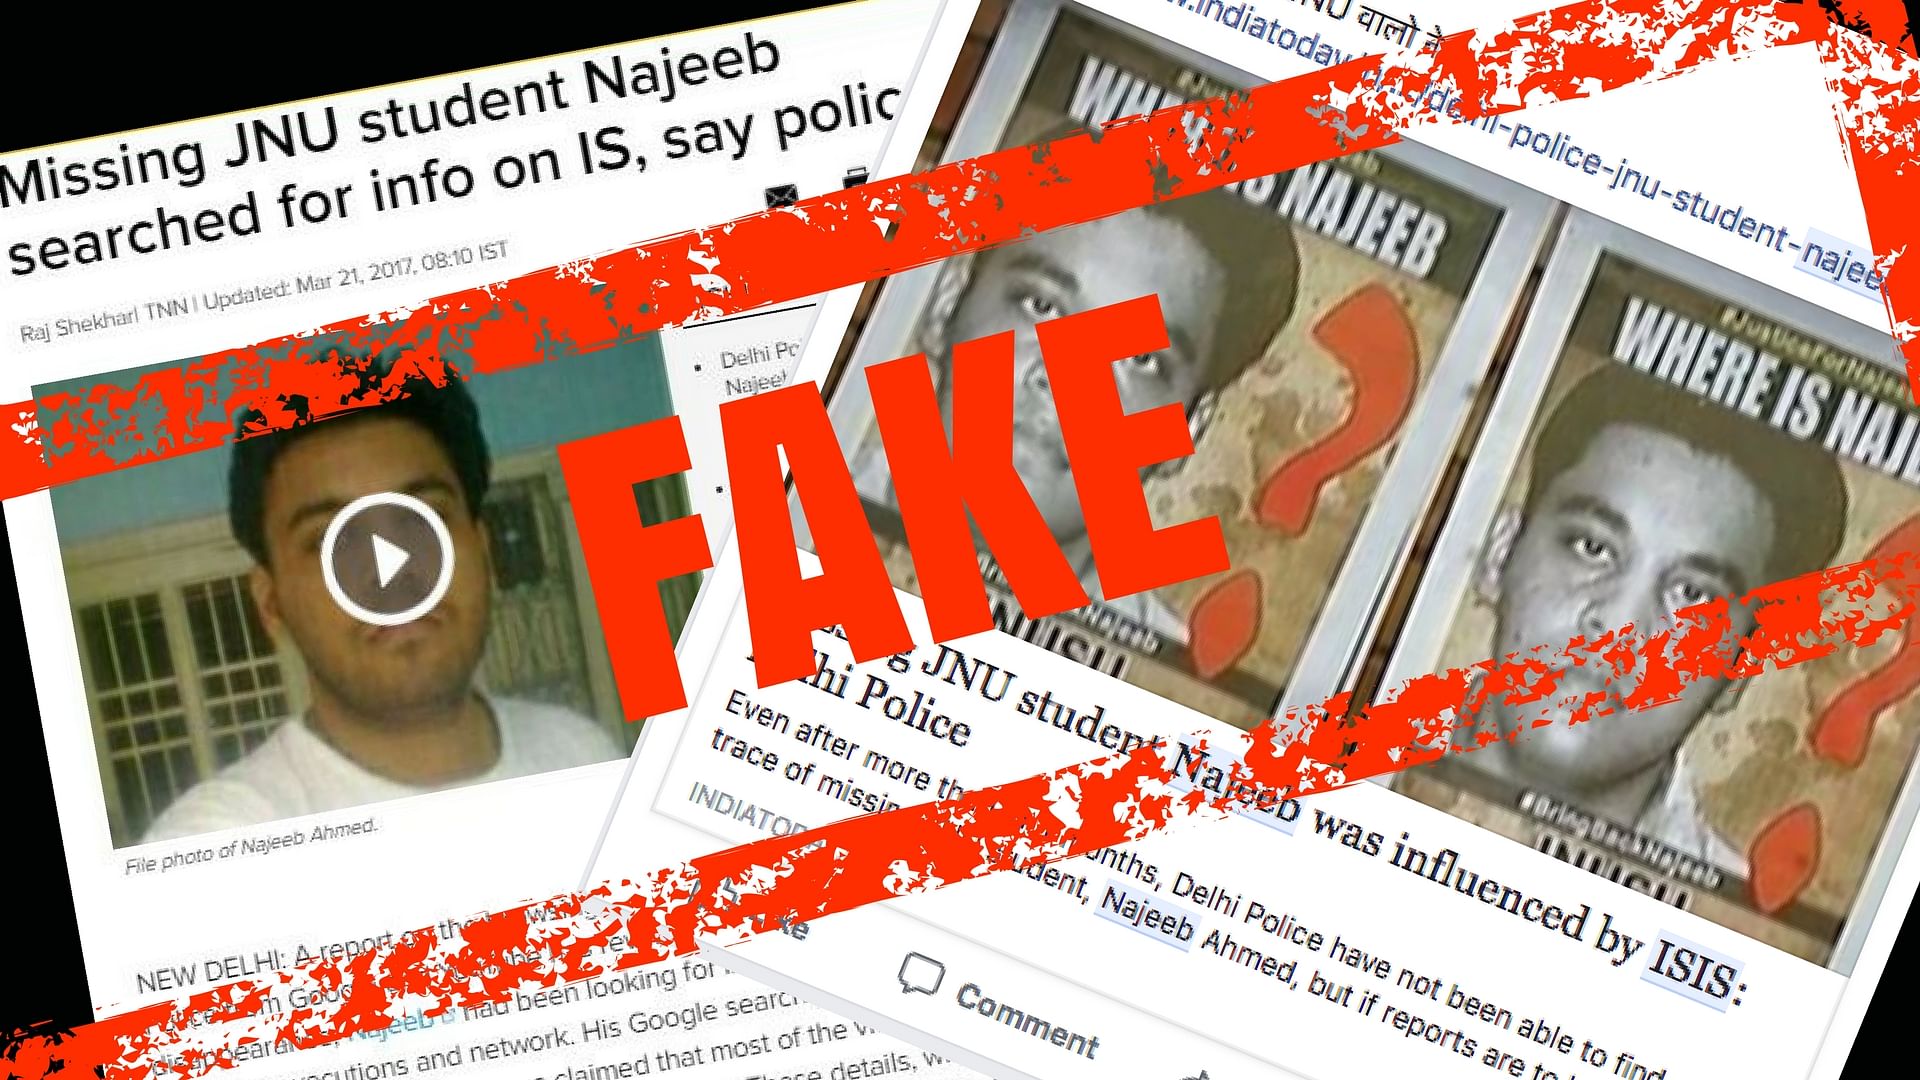 Some people are sharing a 2017 report of <a href="https://timesofindia.indiatimes.com/city/delhi/missing-jnu-student-najeeb-searched-for-info-on-is-say-police/articleshow/57740974.cms">The Times of India</a> insinuating that Najeeb could be an ISIS sympathiser.